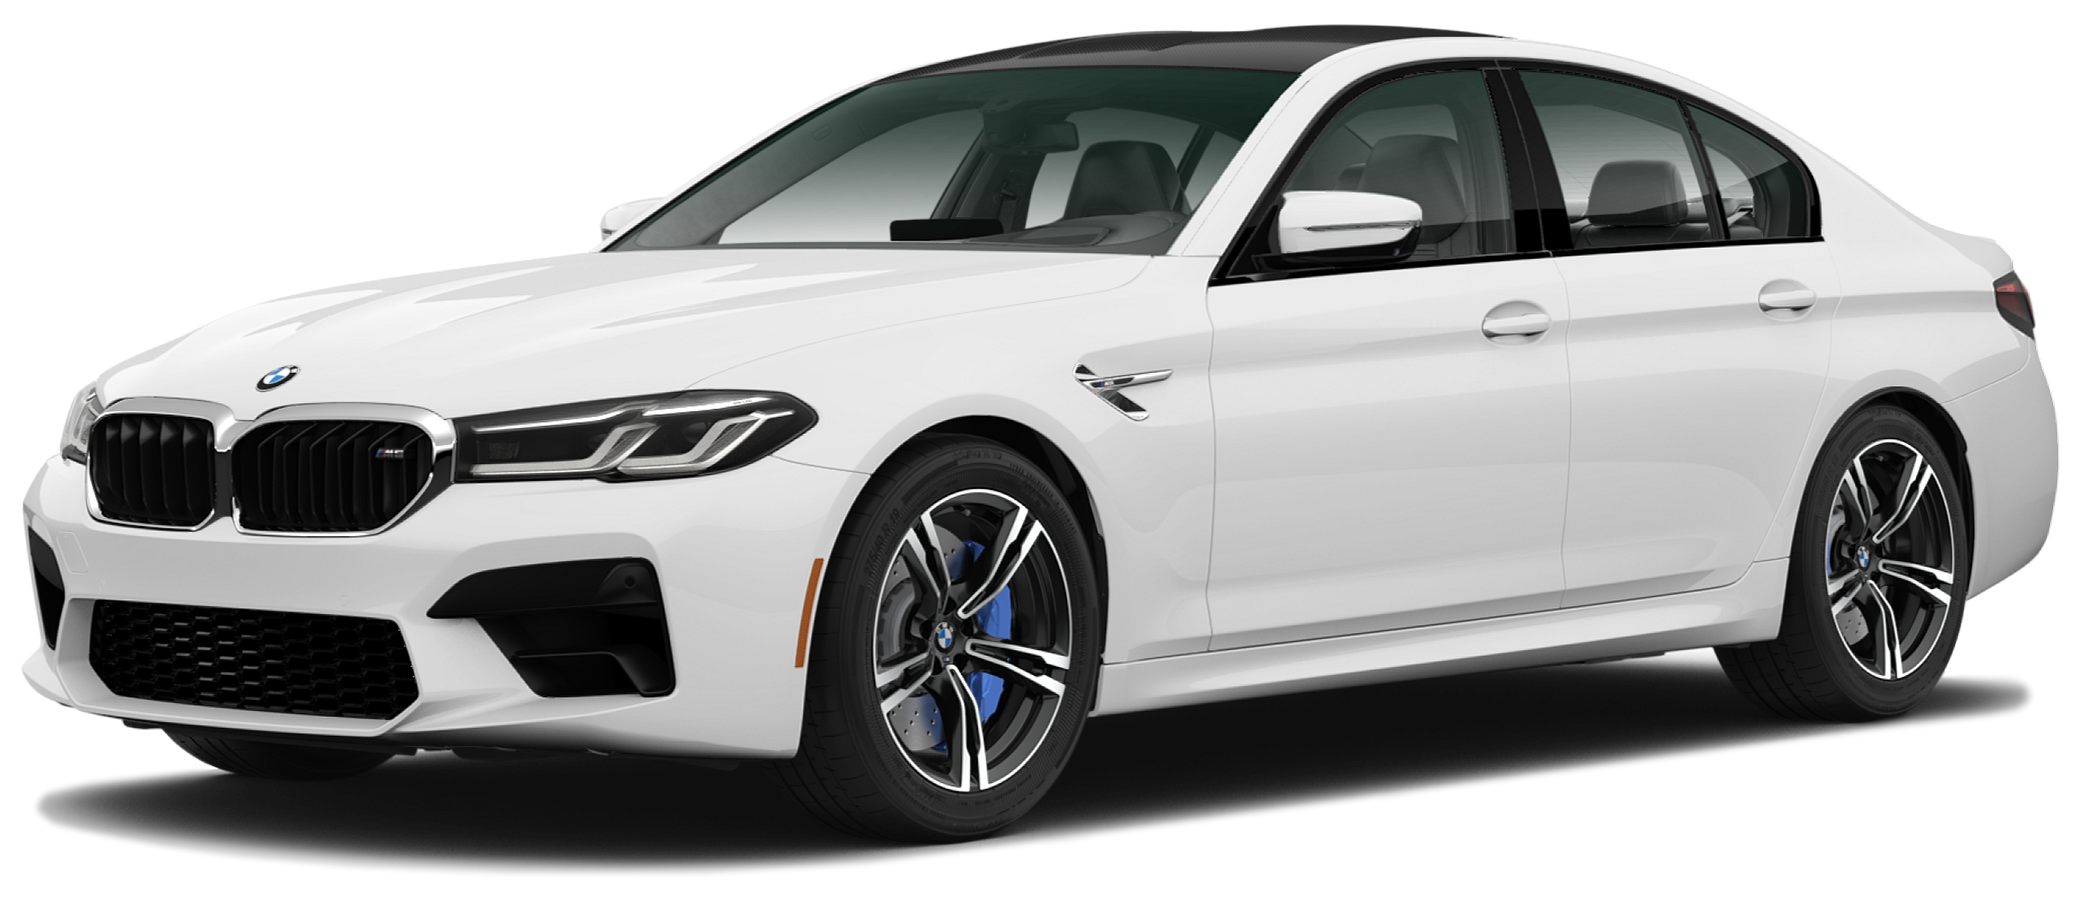 2021 BMW M5 Incentives, Specials & Offers in Bridgewater NJ